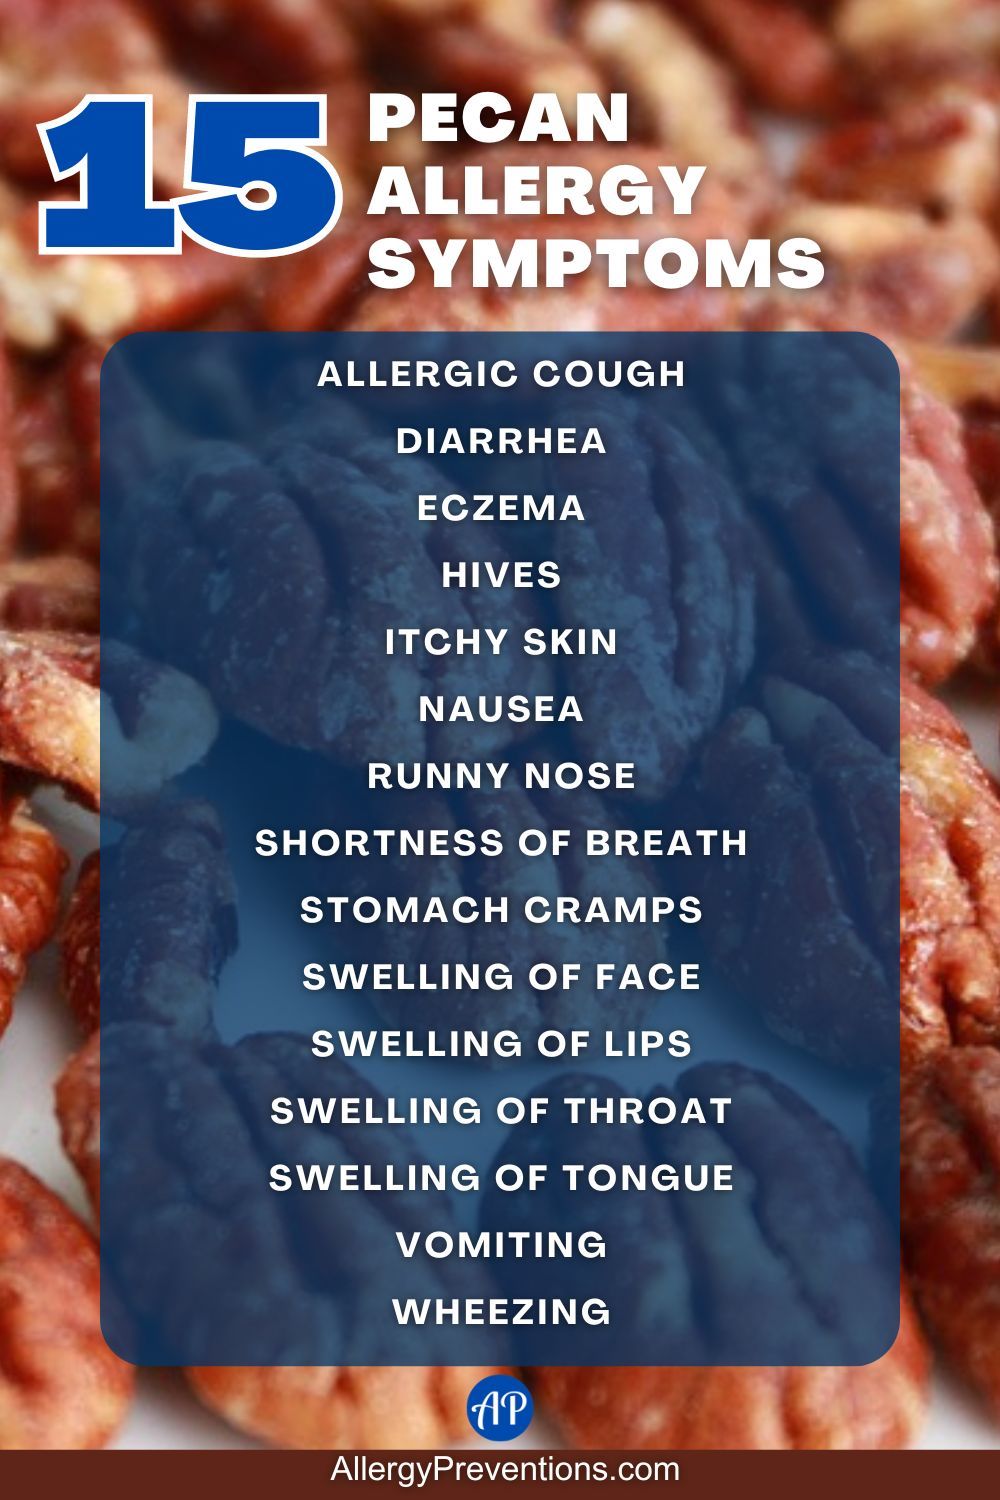 Pecan Allergy Symptoms Infographic: Allergic Cough, Diarrhea, Eczema, Hives, Itchy skin, Nausea, Runny nose, Shortness of breath, Stomach cramps, Swelling of face, Swelling of lips, Swelling of throat, Swelling of tongue, Vomiting, and Wheezing.